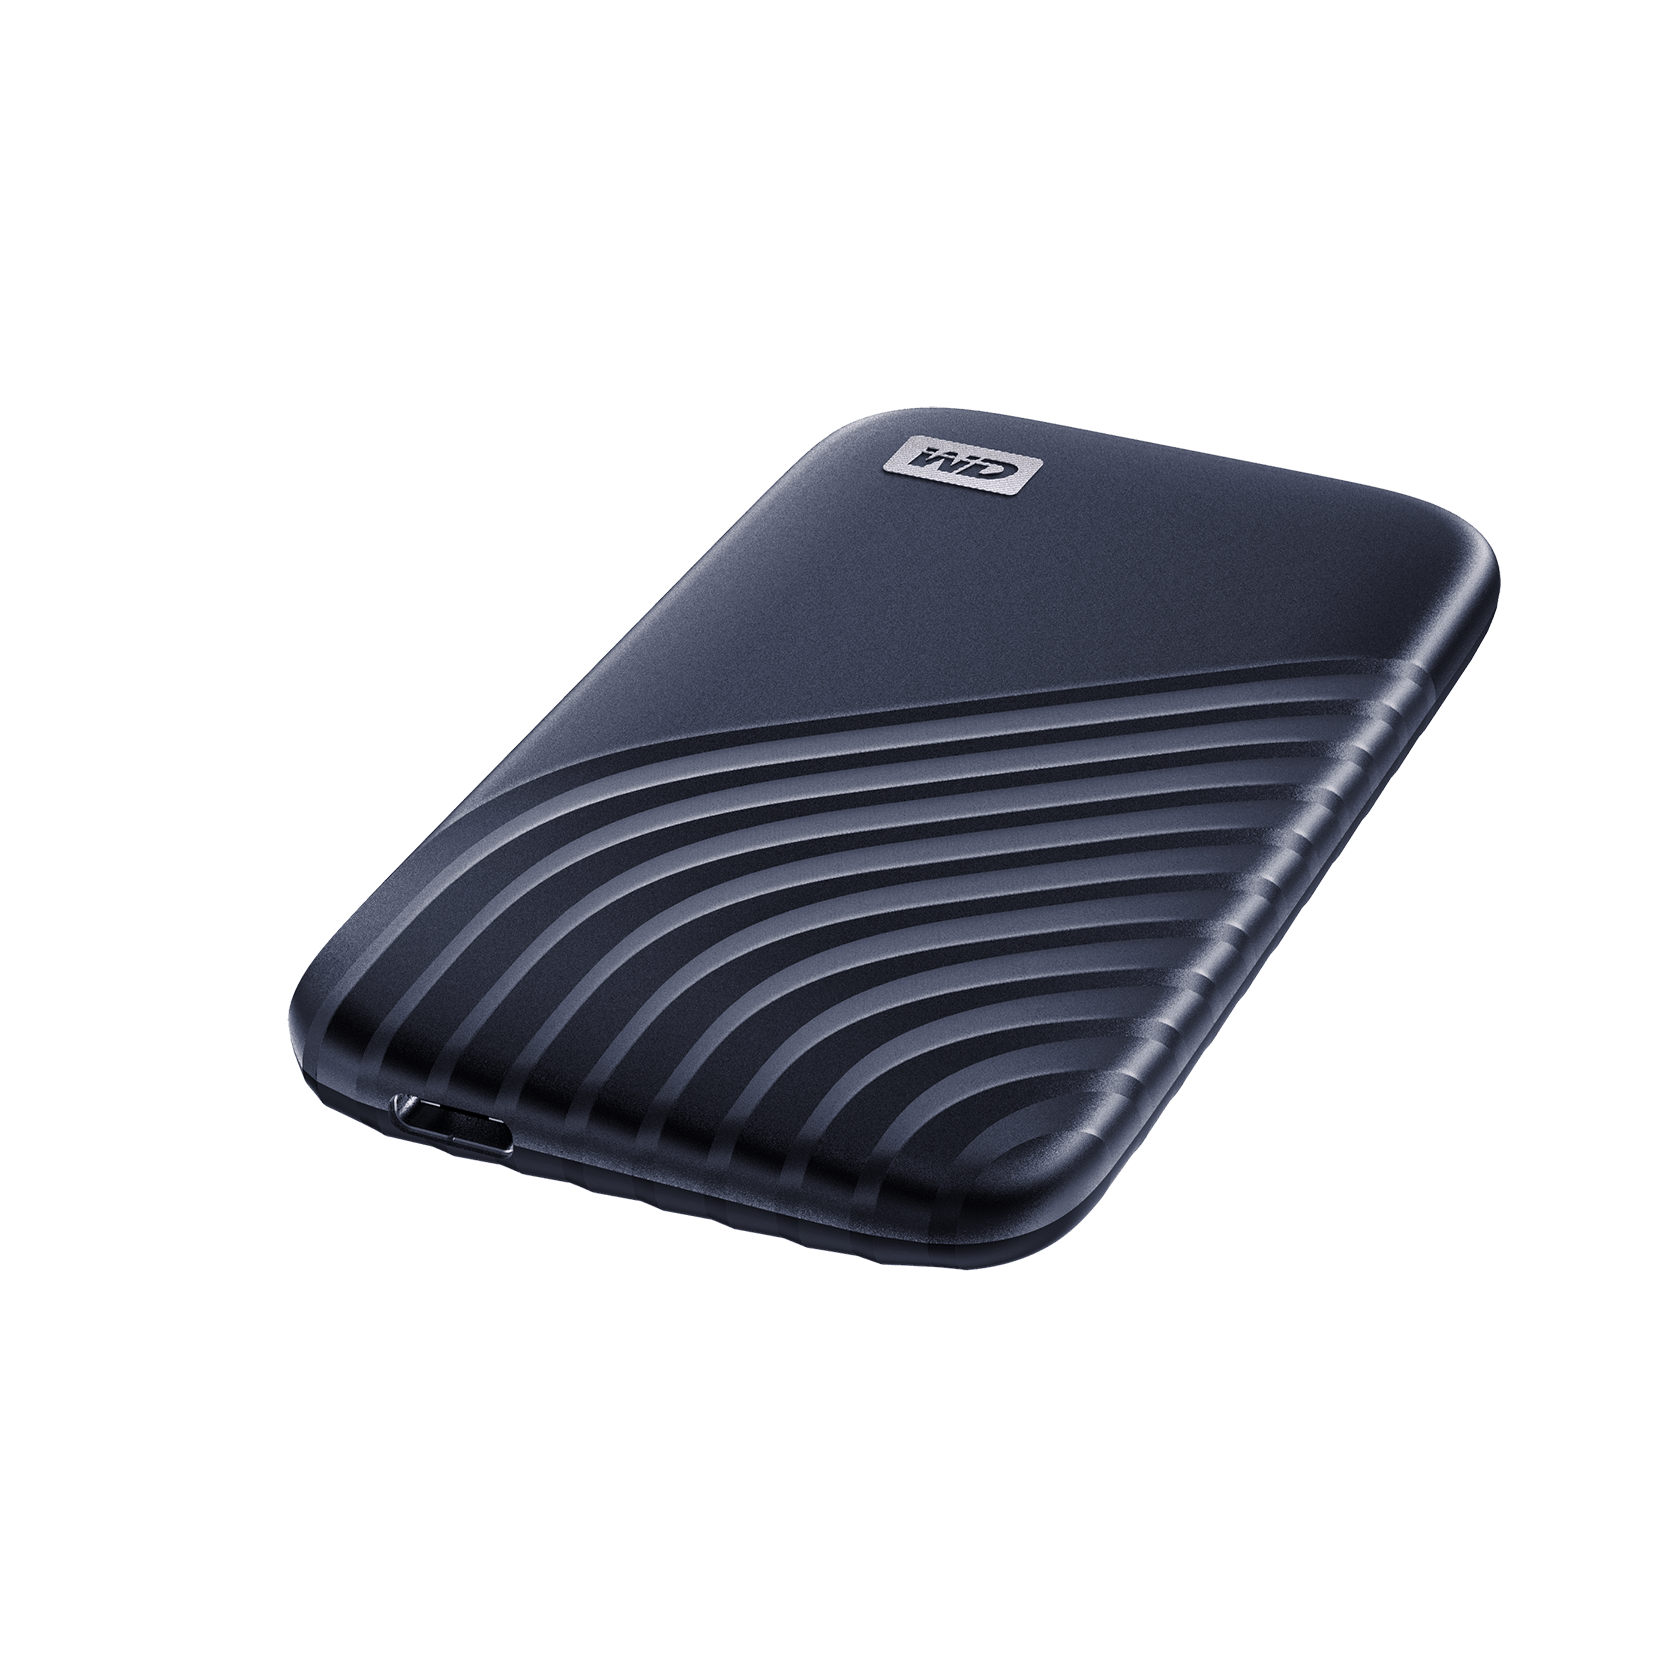 WD 2TB My Passport SSD, Portable External Solid State Drive, Blue - WDBAGF0020BBL-WESN - image 4 of 8